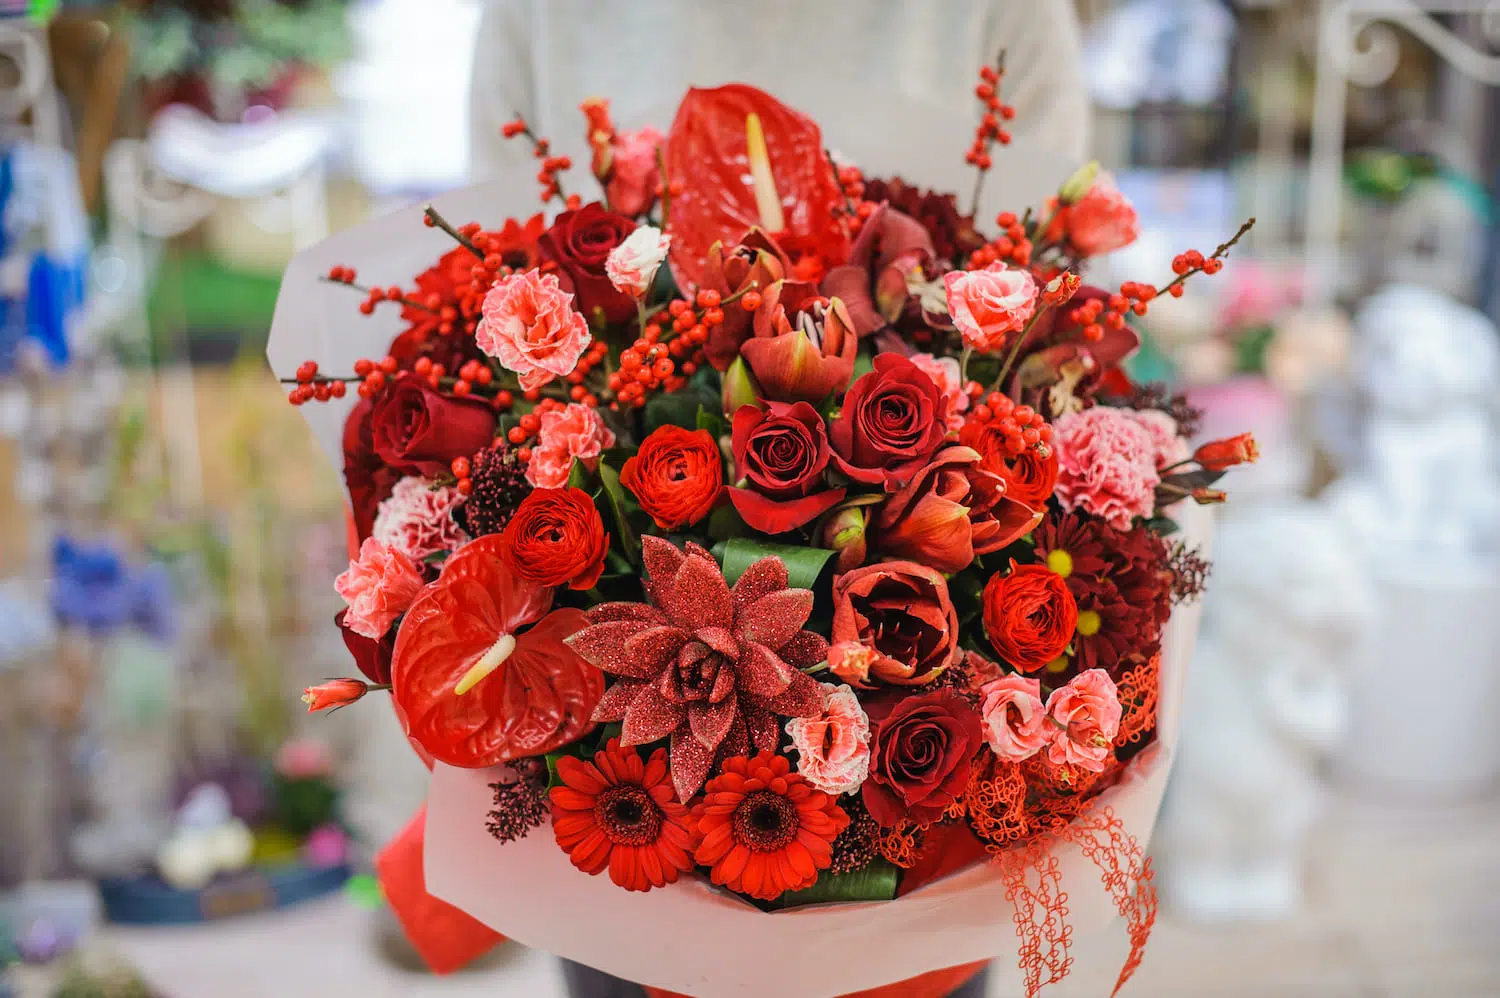 Buy Christmas bouquets in Singapore from Windflower Florist.
